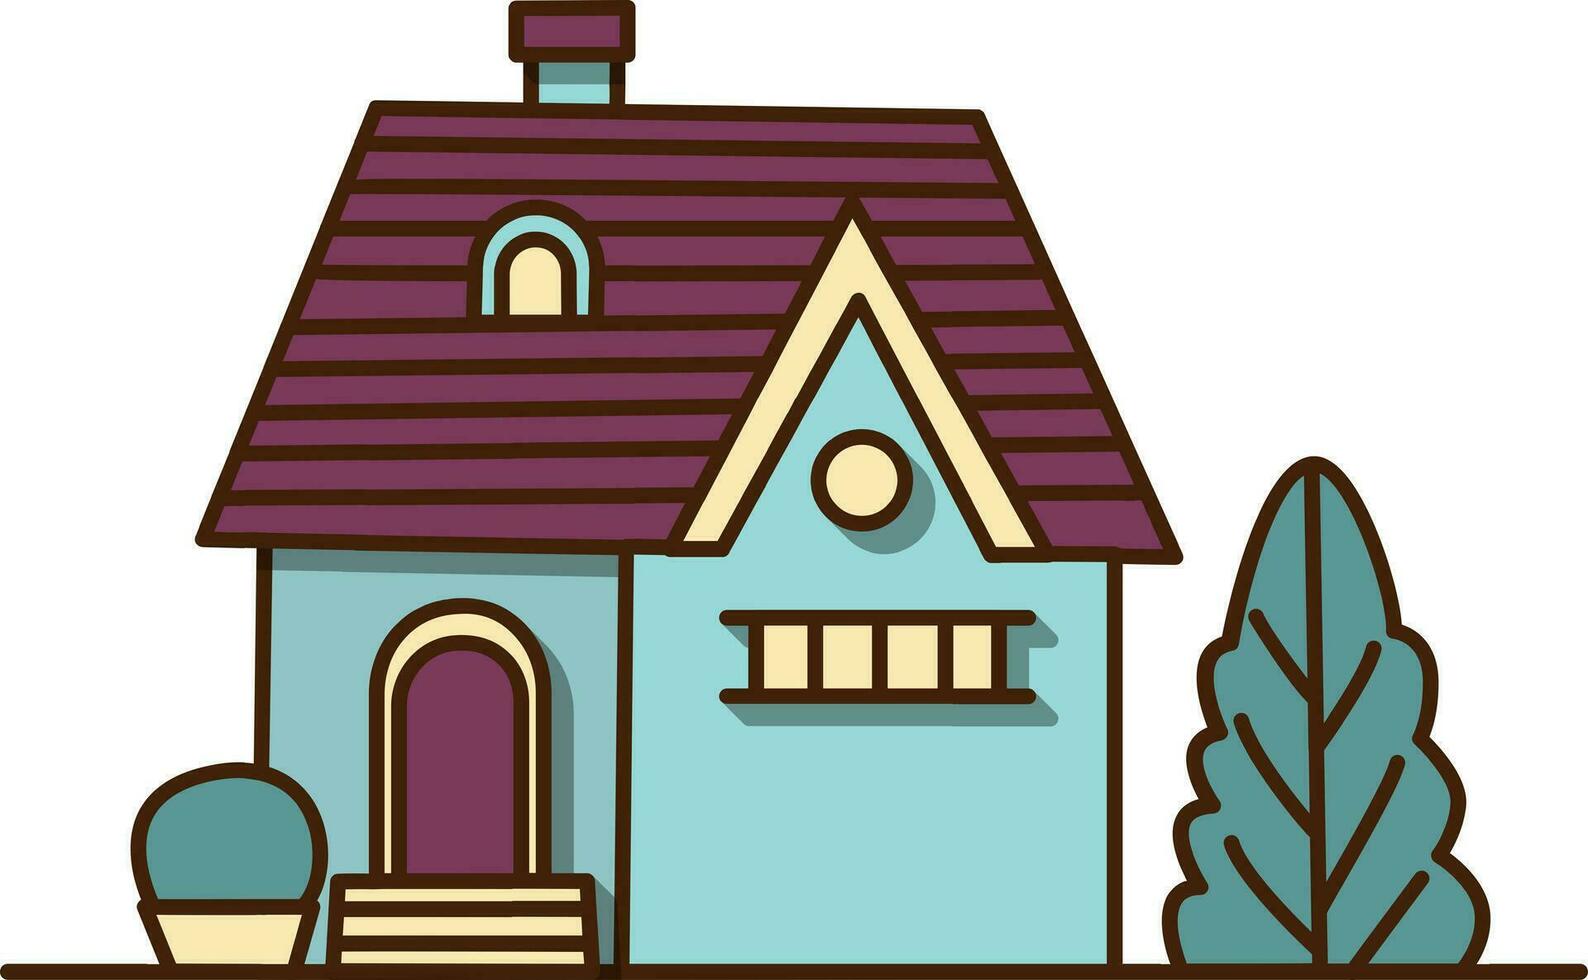 Vector blue house with brown roof on flat style icon. Vector architecture style mansion cottage building icon.